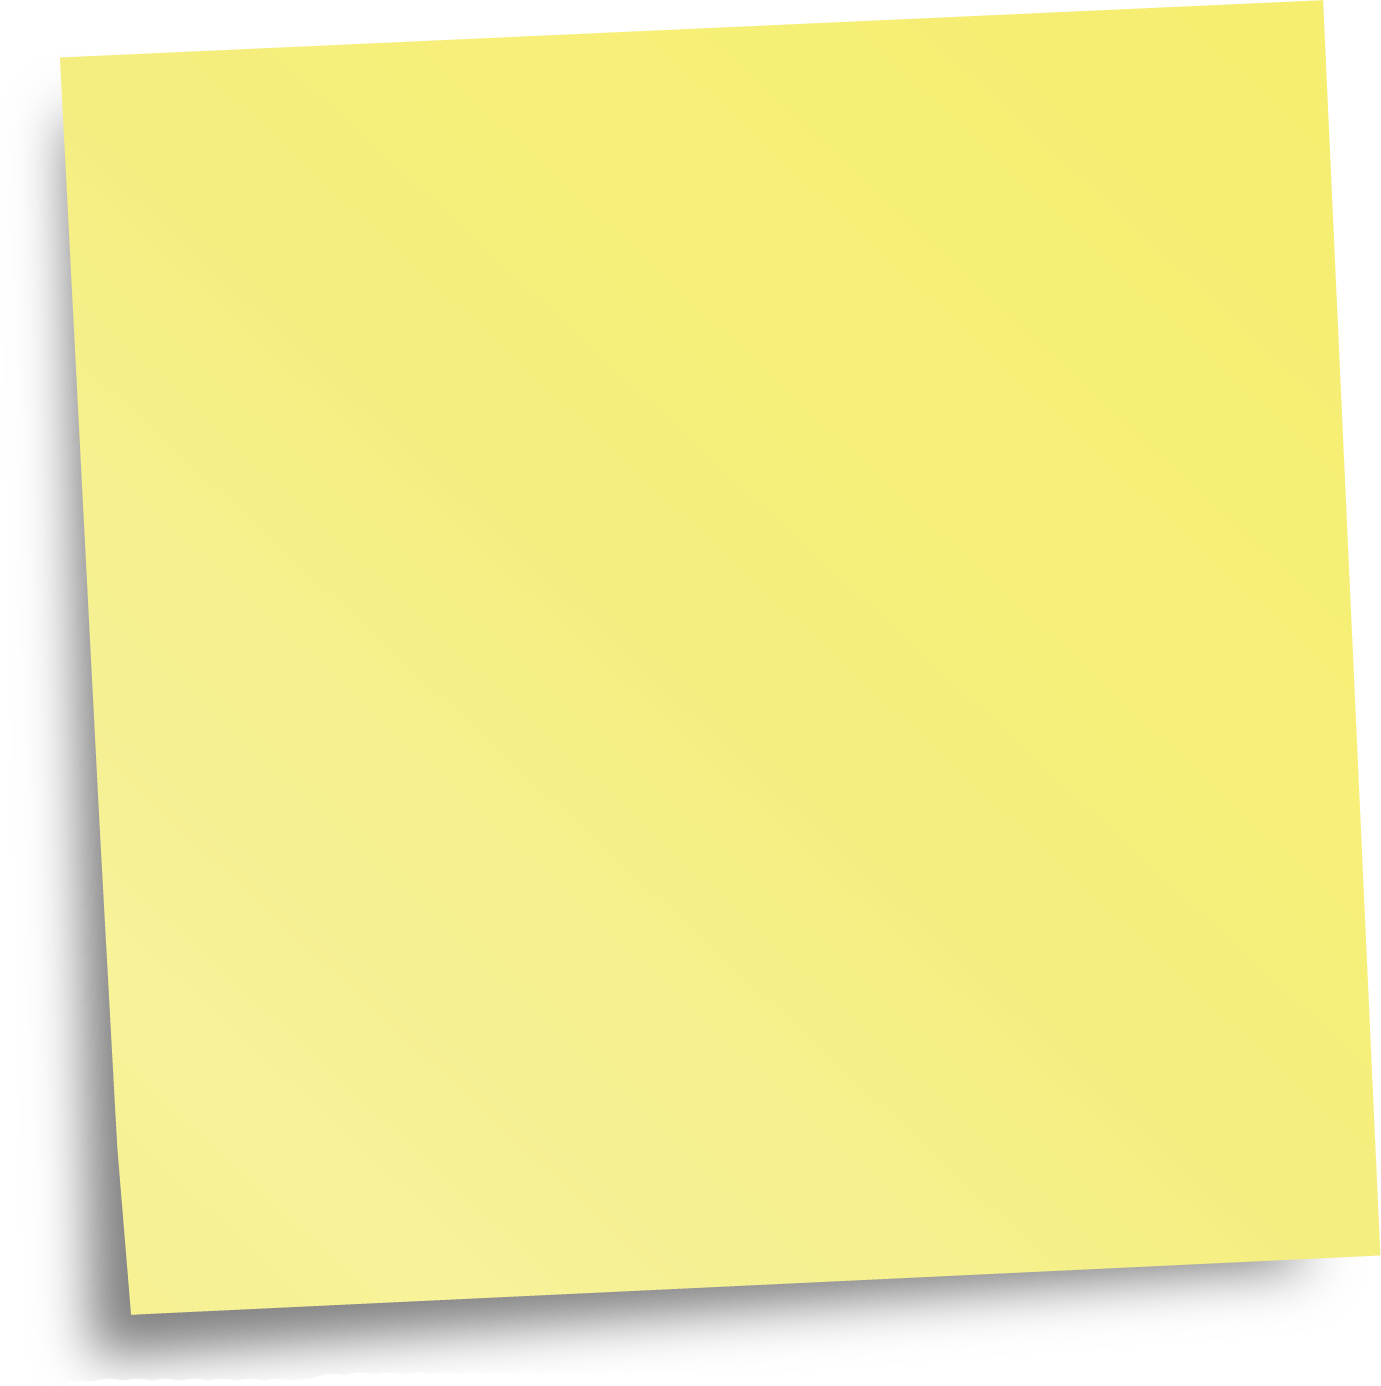 Yellow Sticky Note Png - KibrisPDR